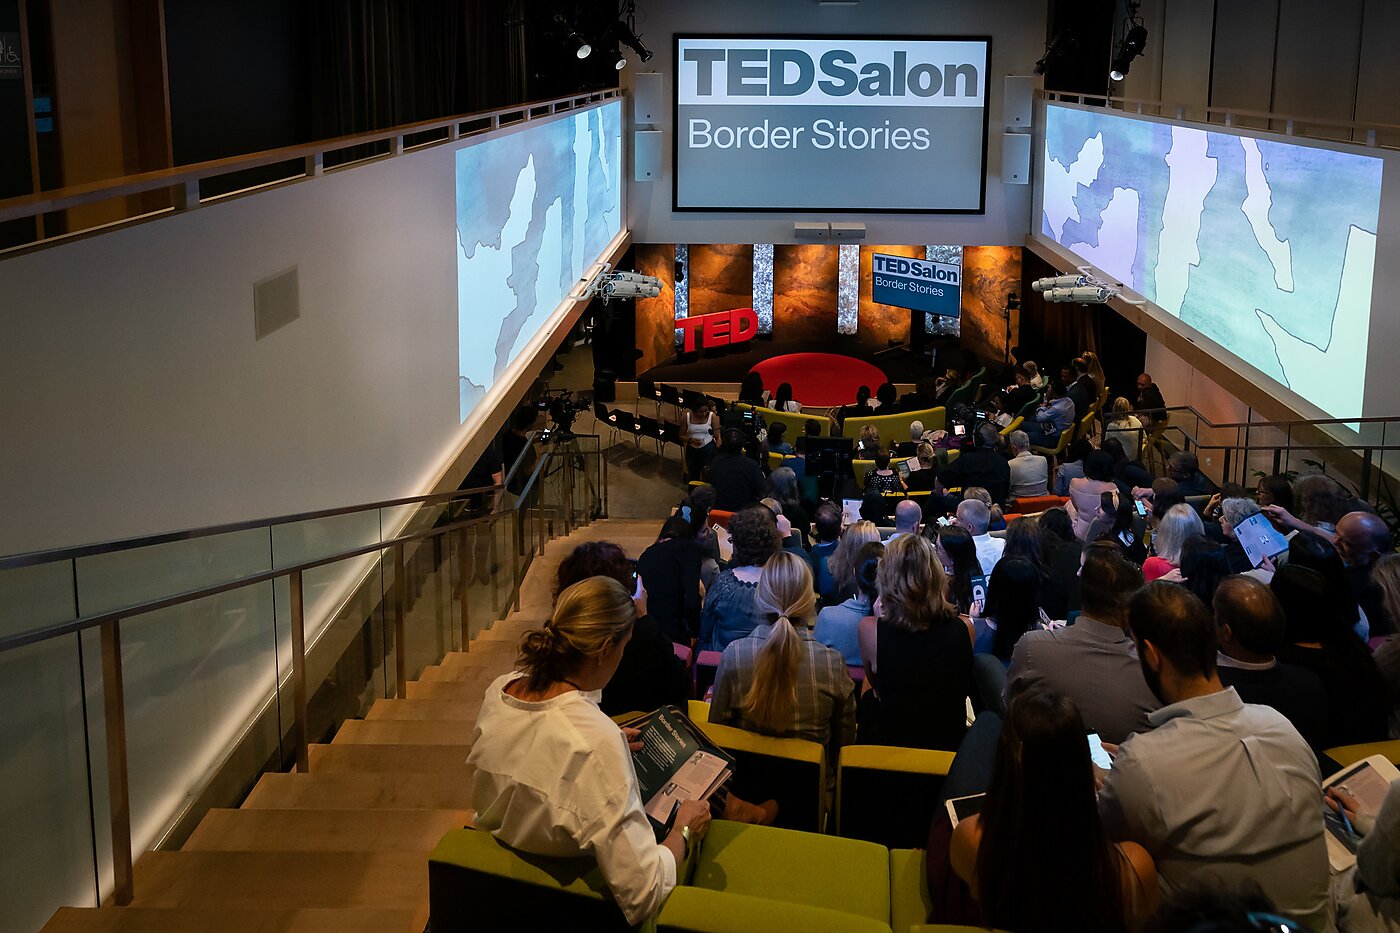 Crowd and auditorium for TedSalon